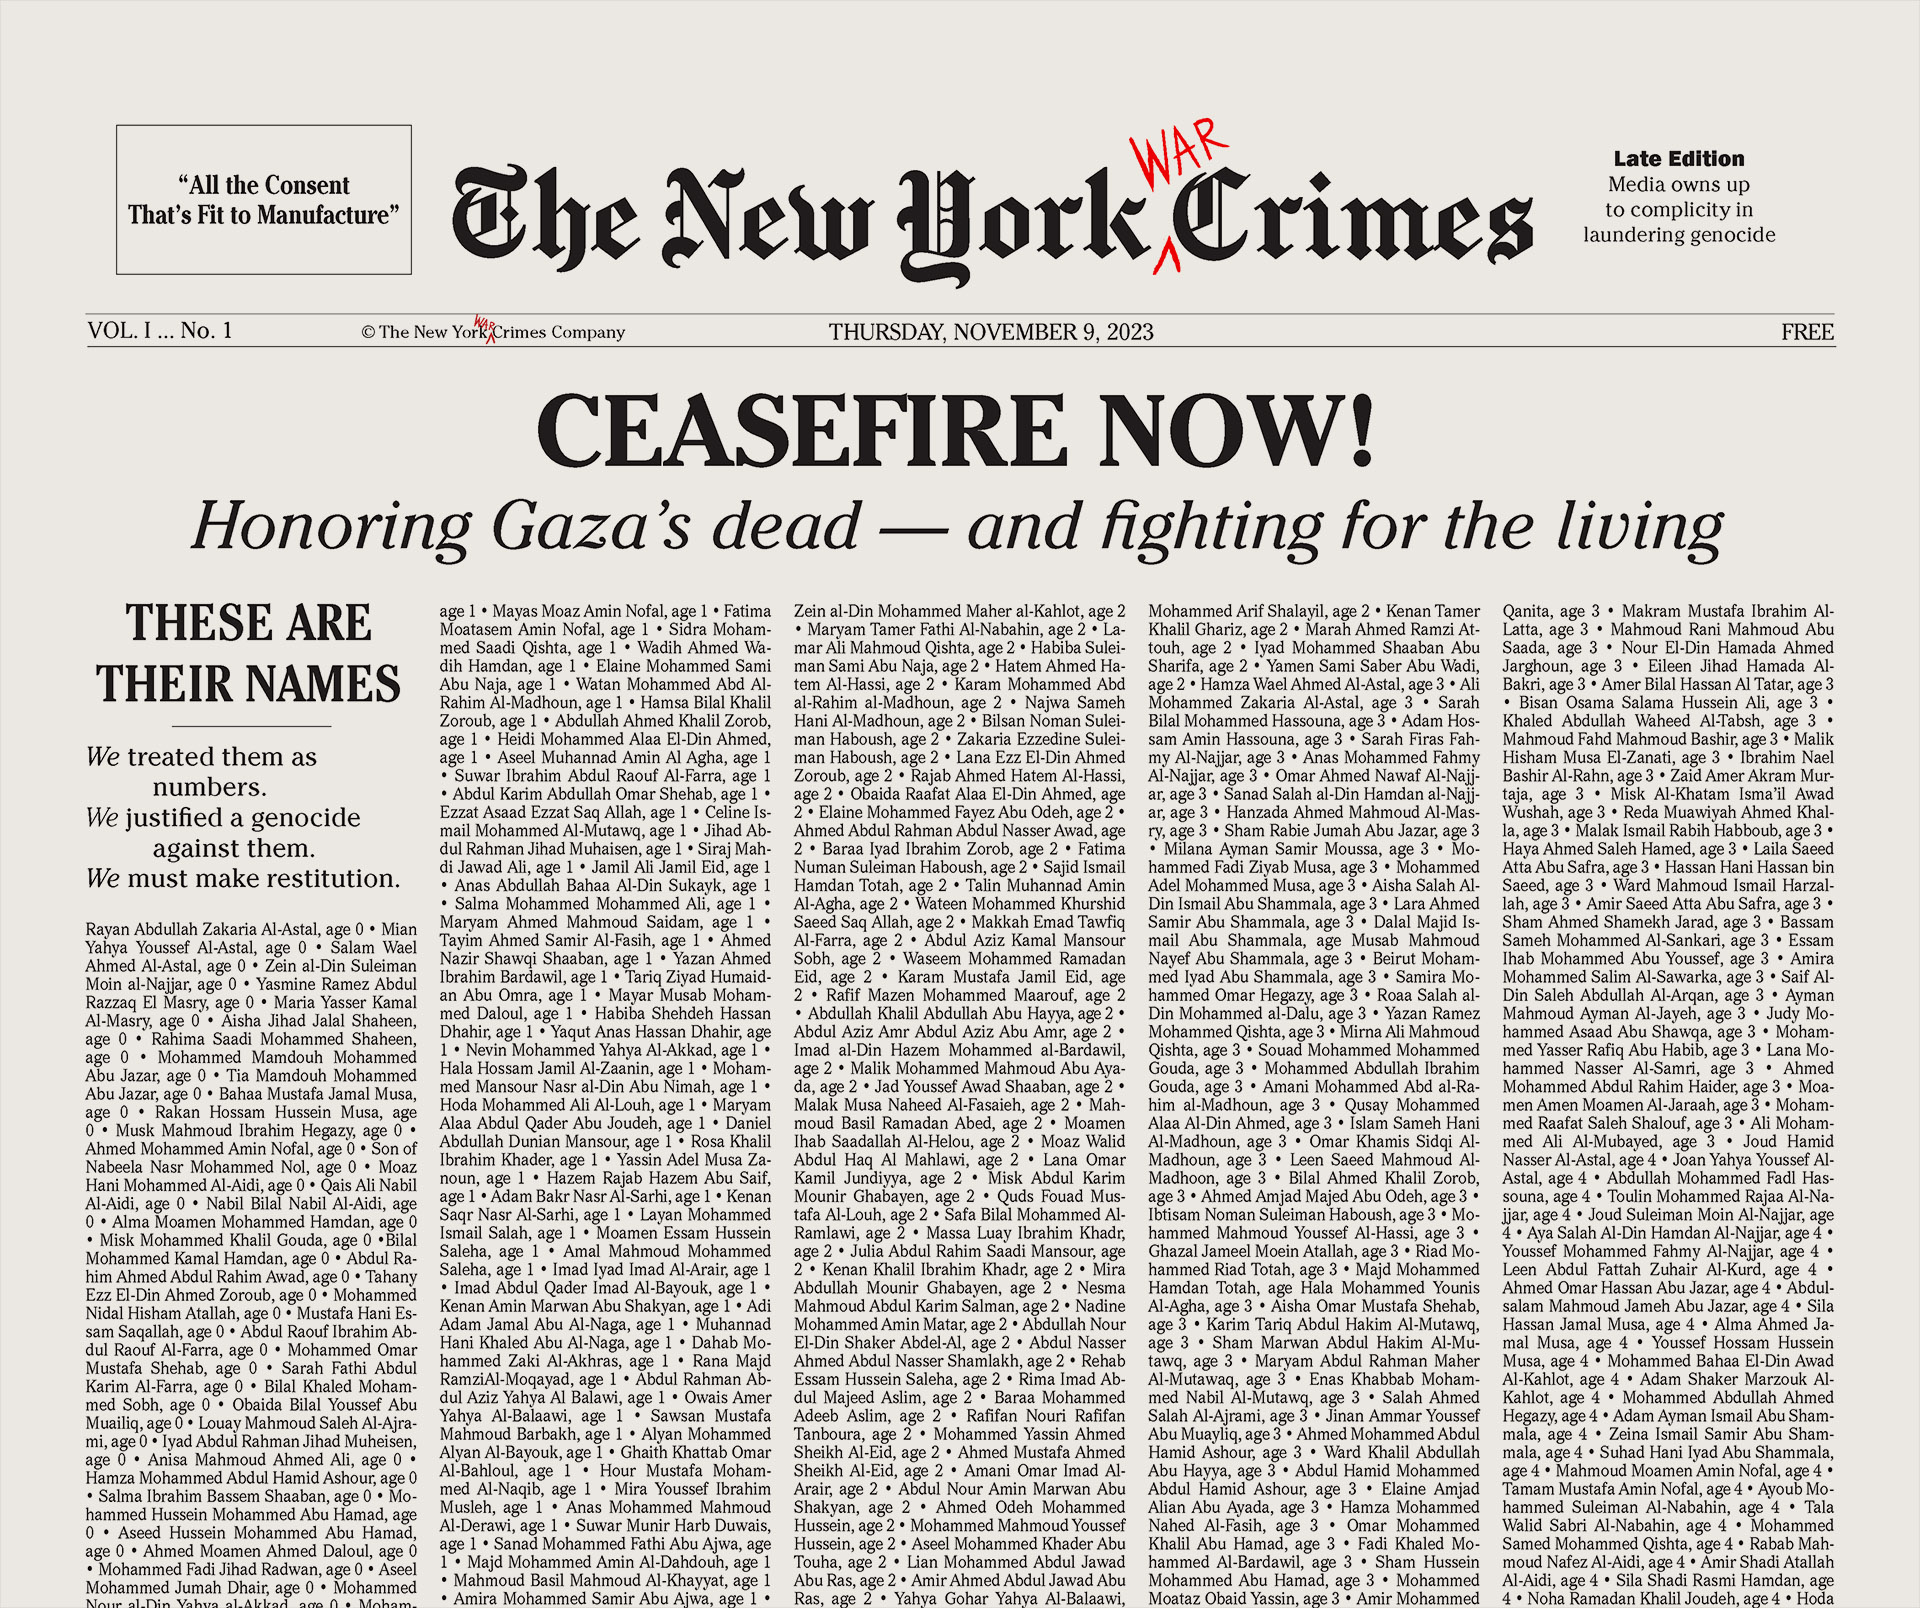 https://newyorkwarcrimes.com/media/pages/print-issue-vol-i-no-1-ceasefire-now/3f437addb7-1708980694/ny-crimes-01-cover.jpg